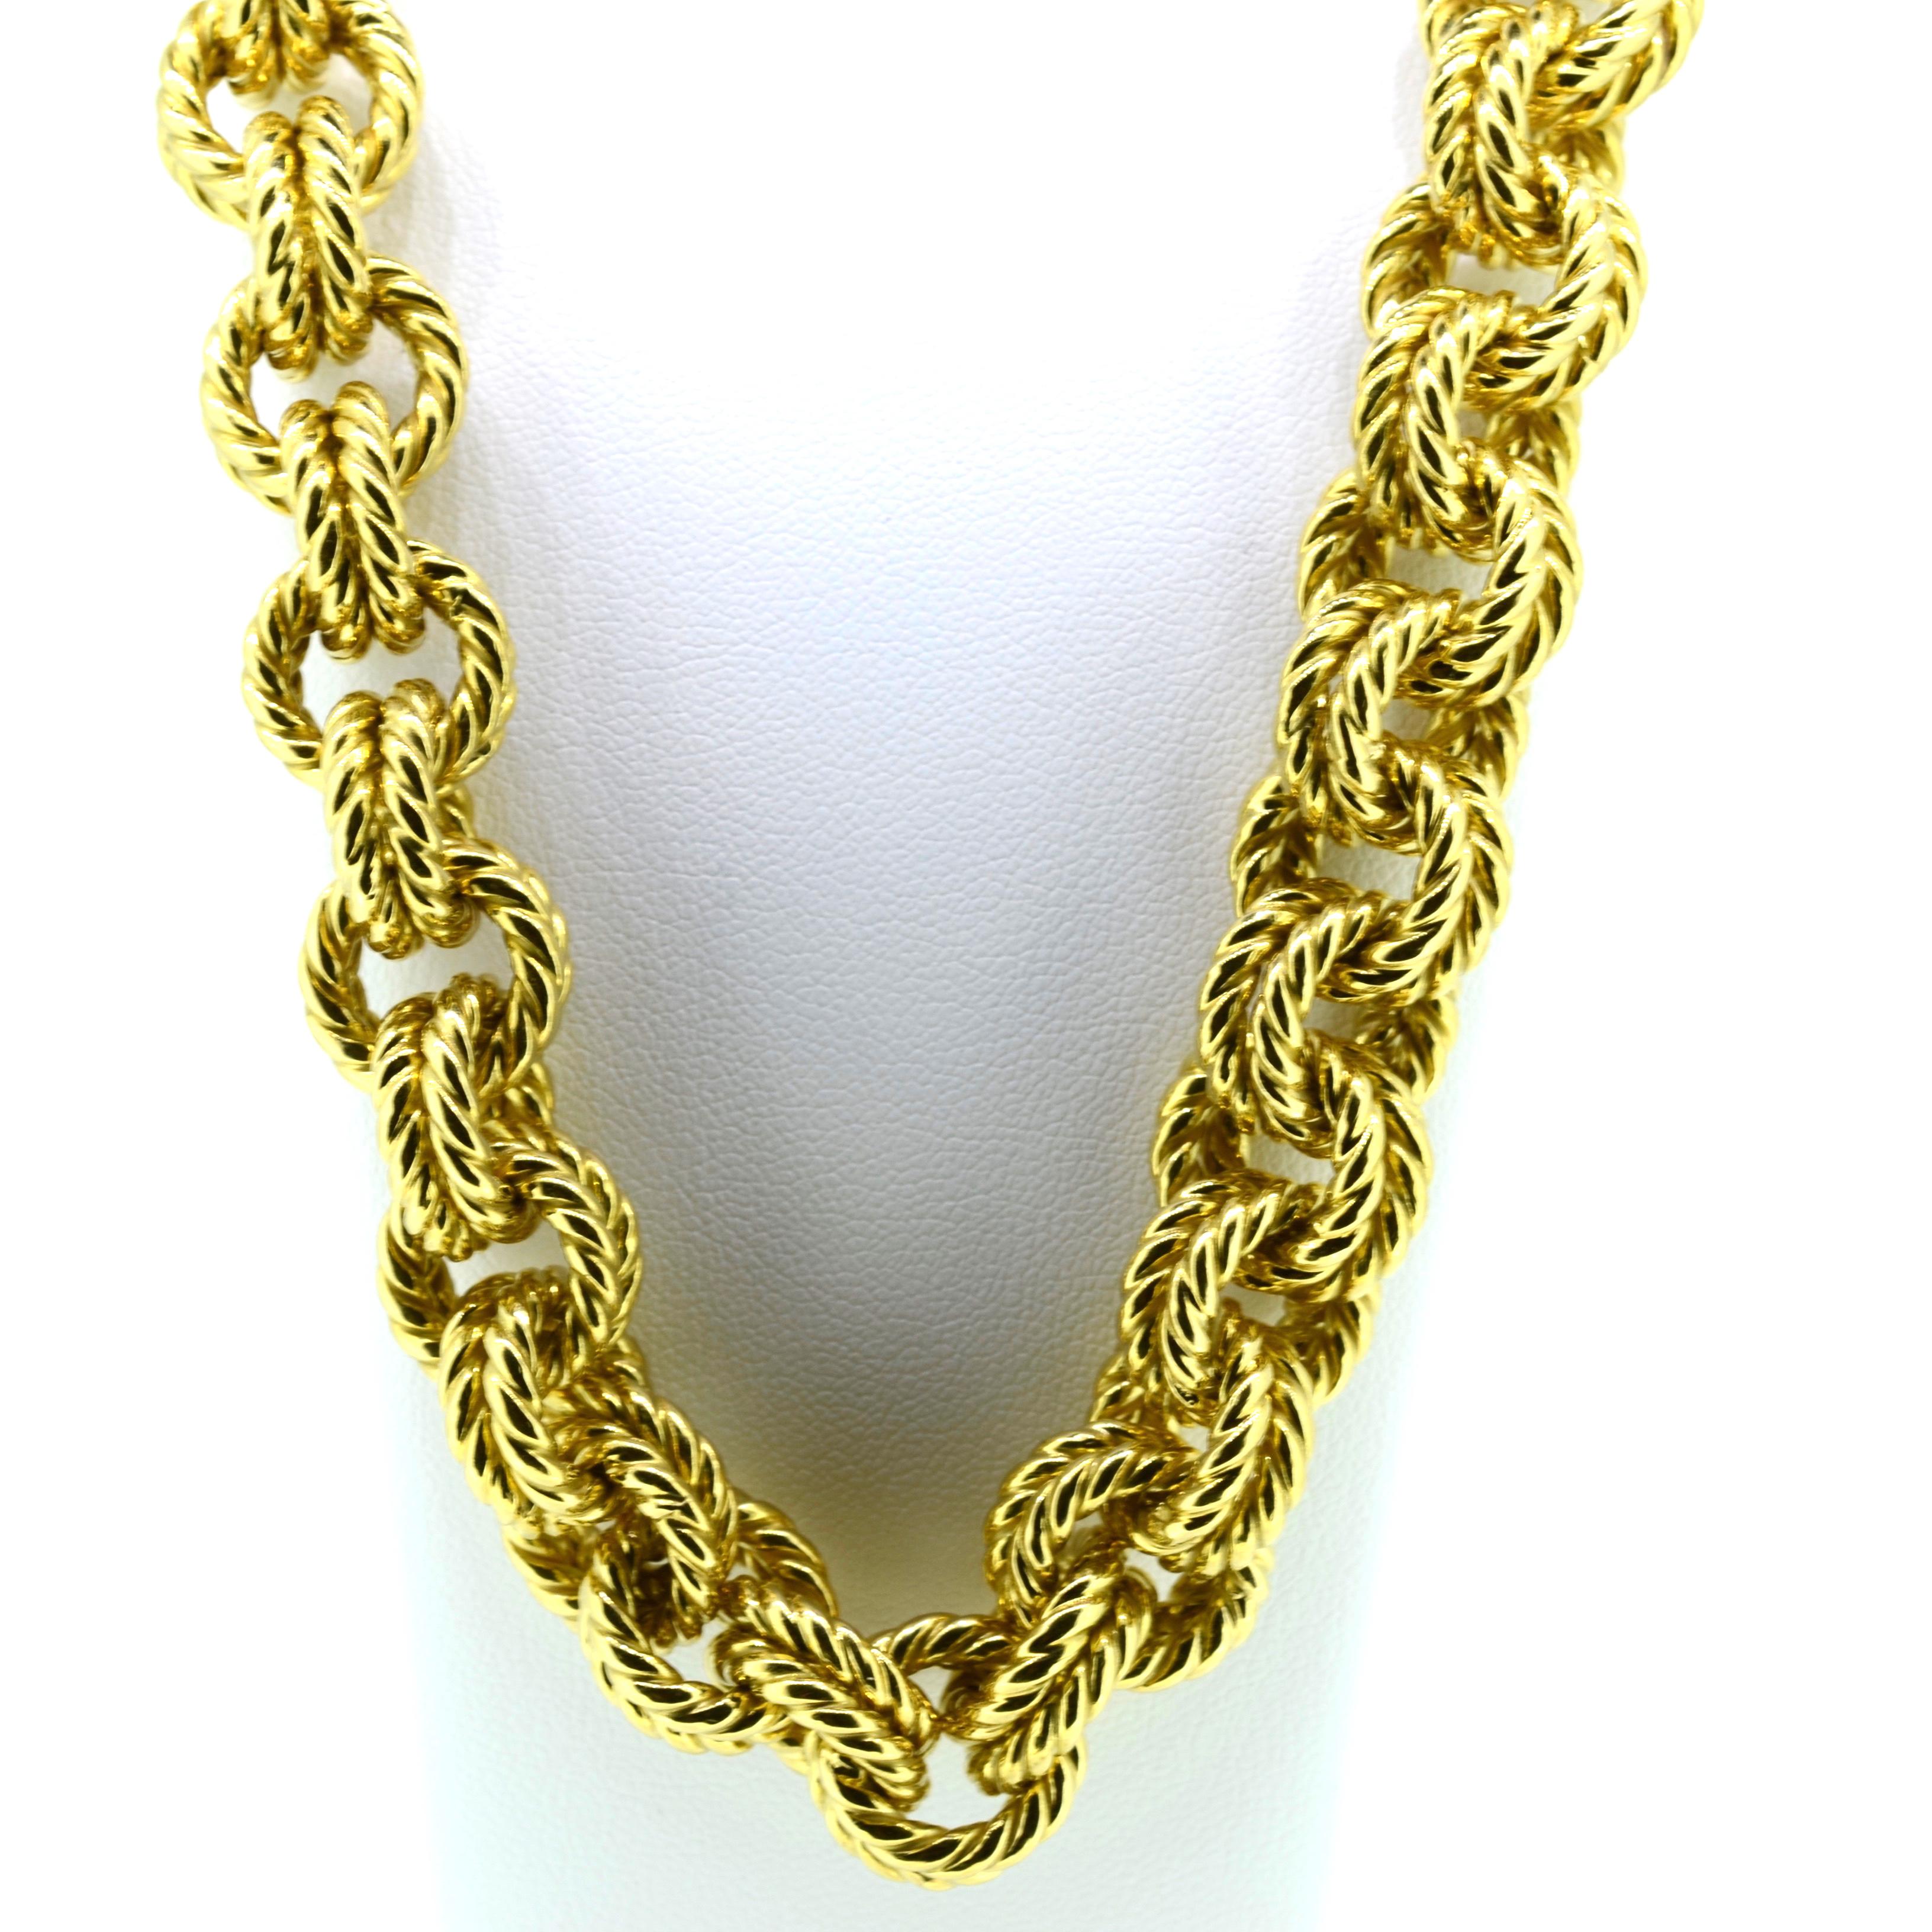 18 kt yellow gold heavy double spiral link neck chain.  18